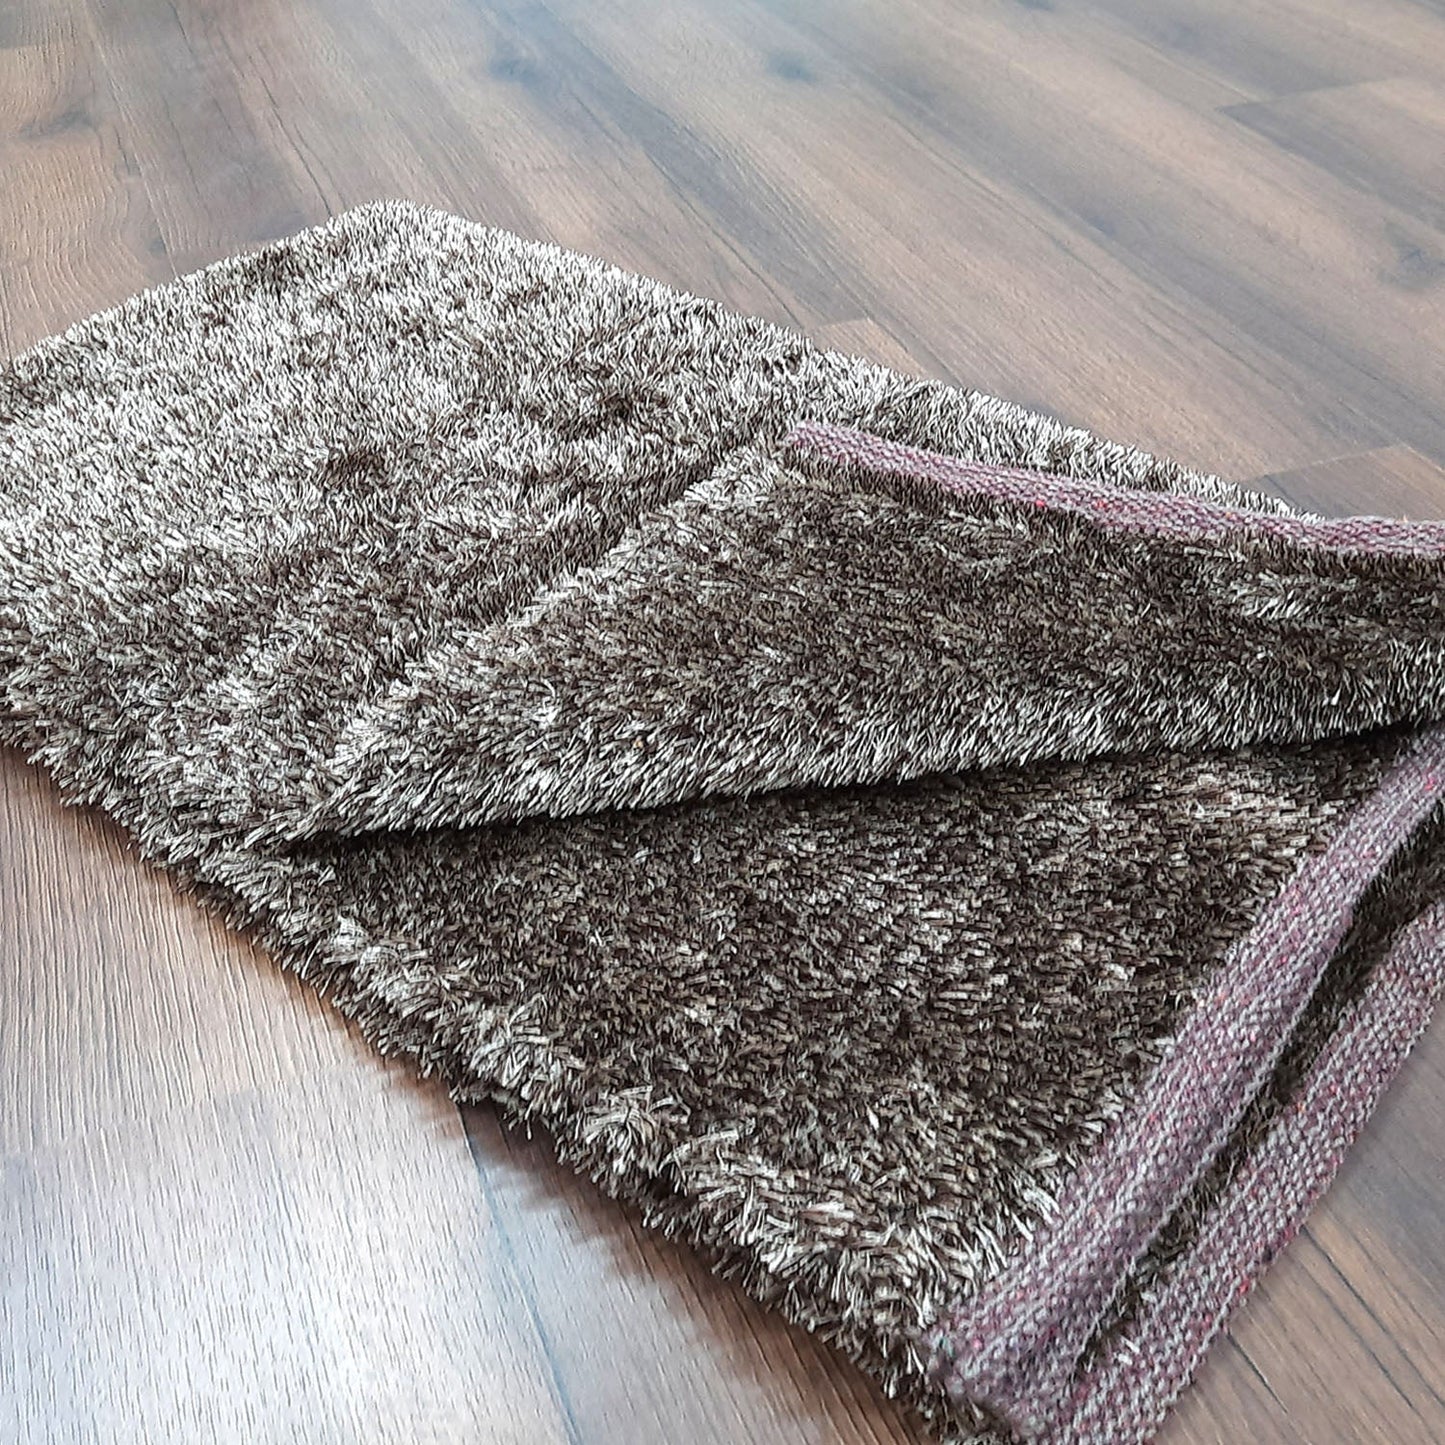 Flurry Yarn Fur Dhurrie For Living Room|Brown With White Shade|By Avioni| 90cm x 150cm (~3×5 Feet)